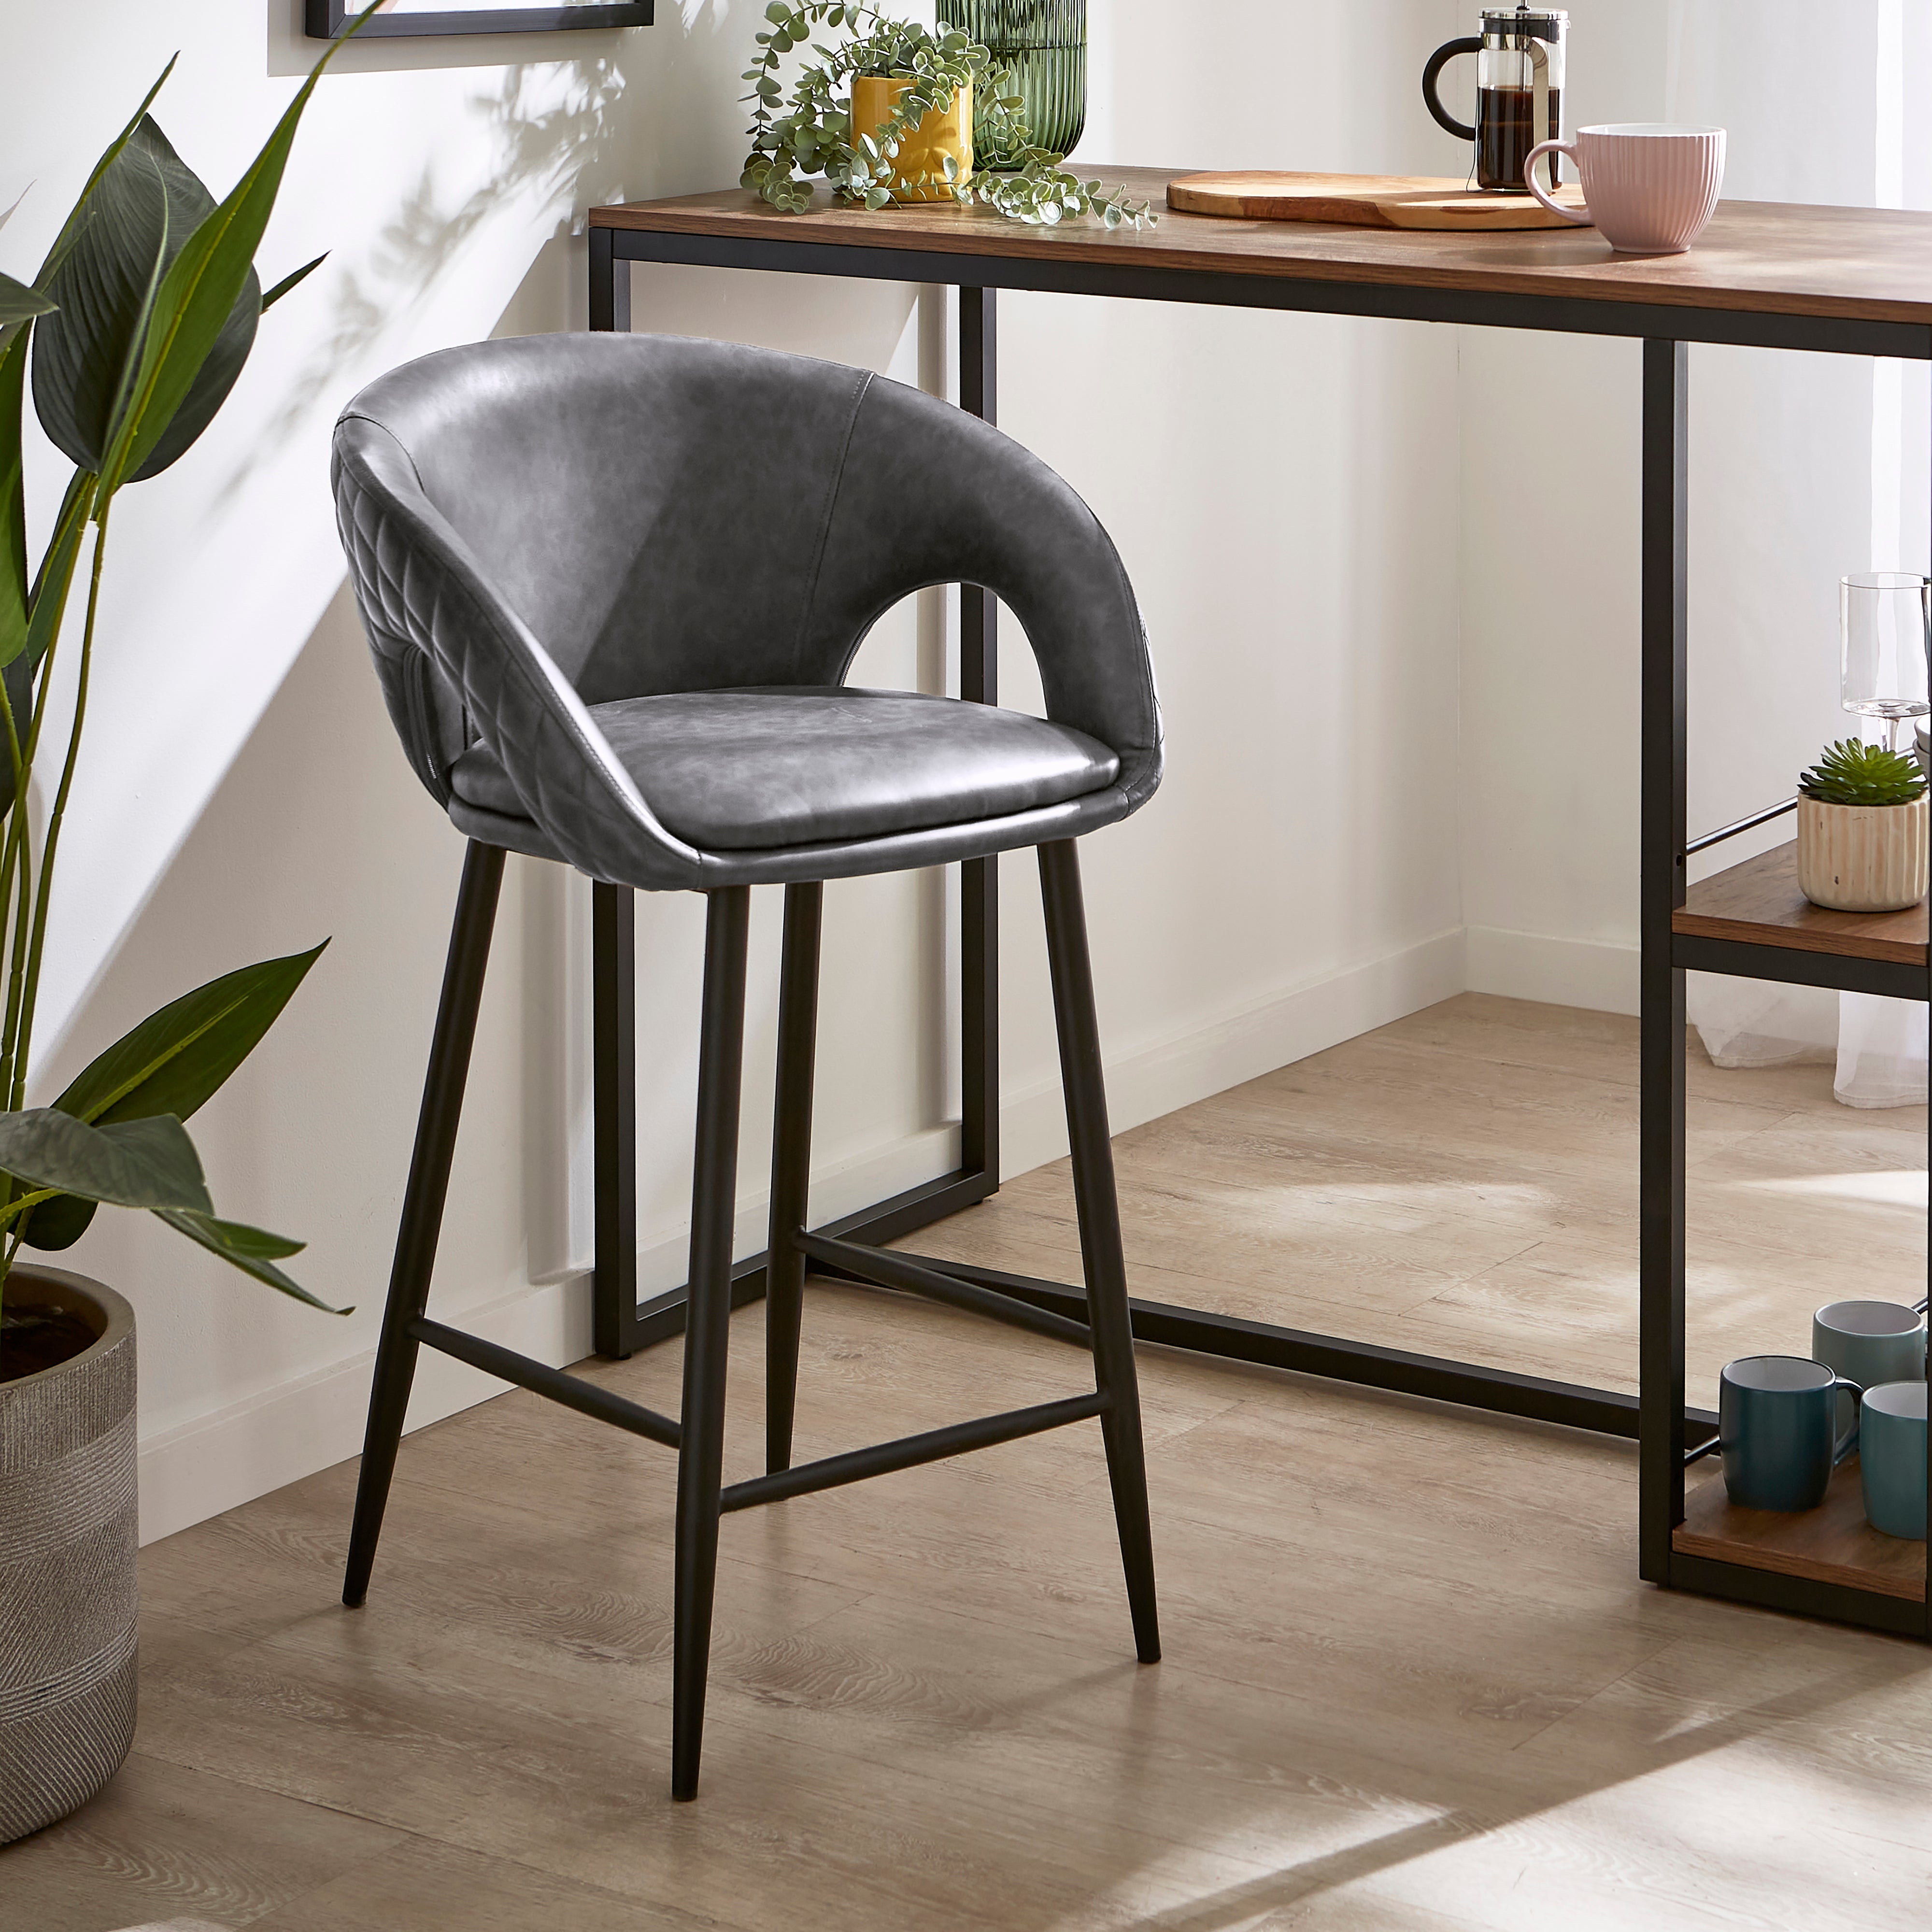 Dillon Bar Stool, Faux Leather Faux Leather Grey